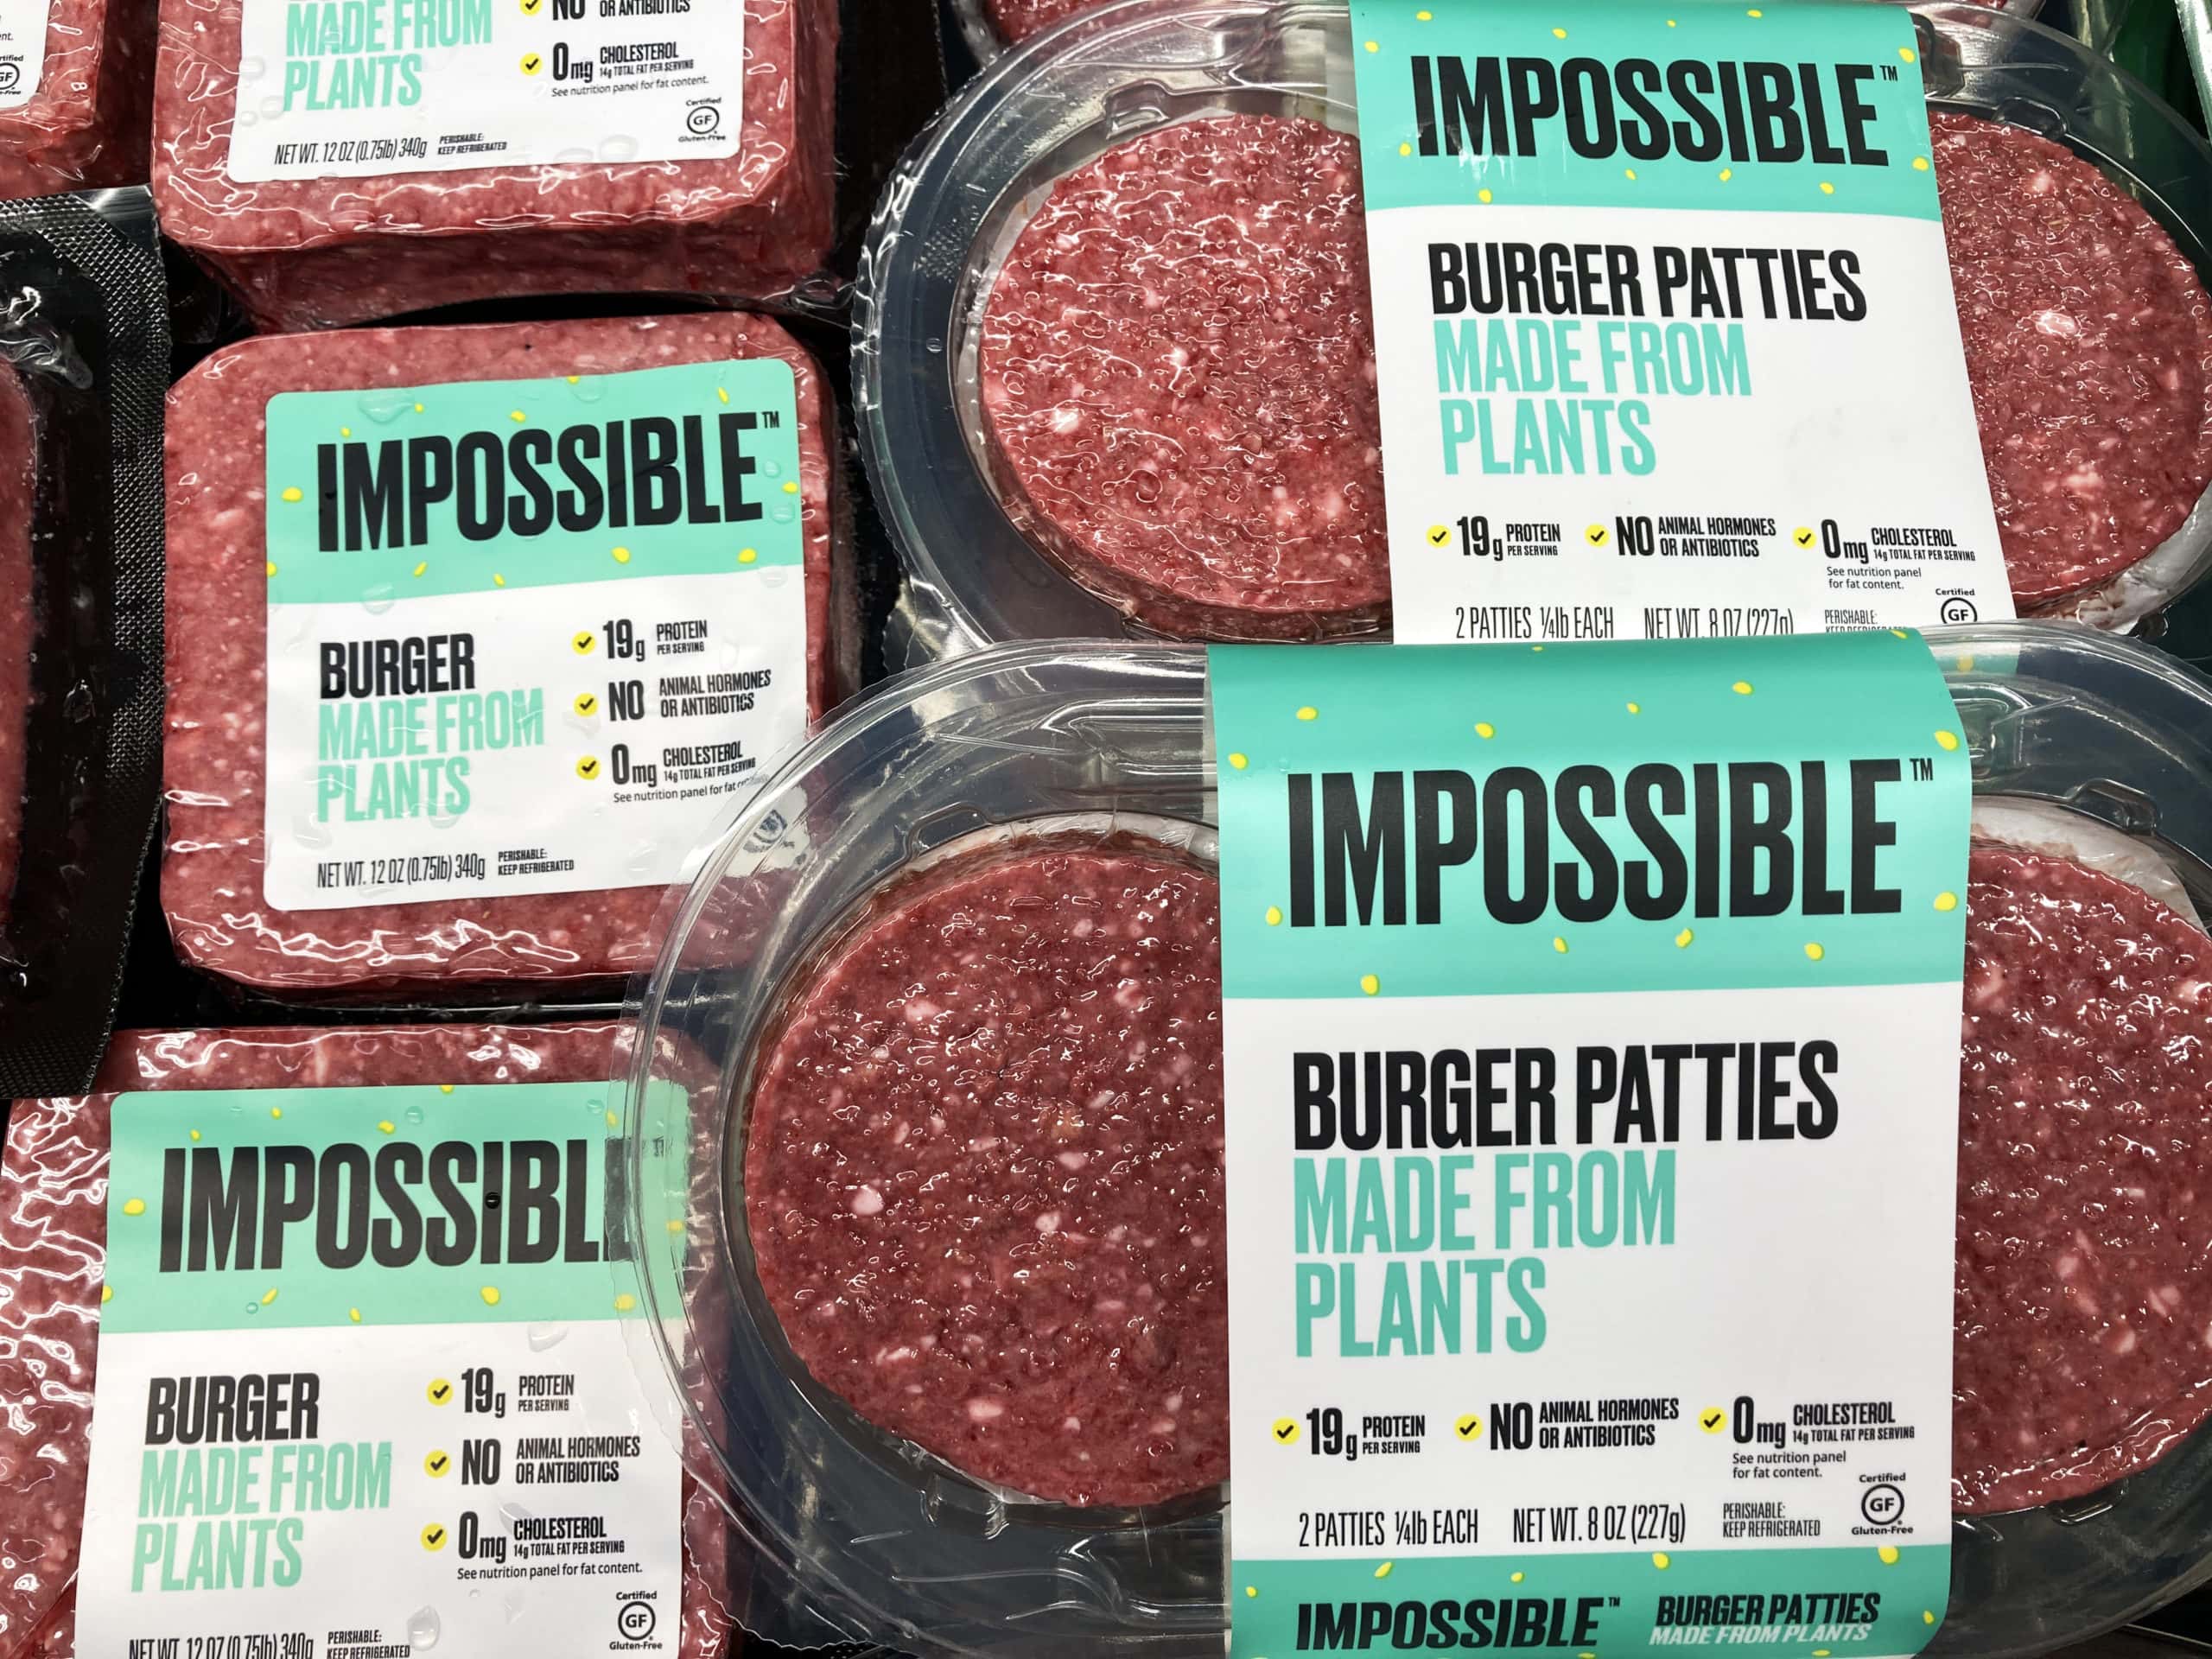 is the Impossible burger healthy